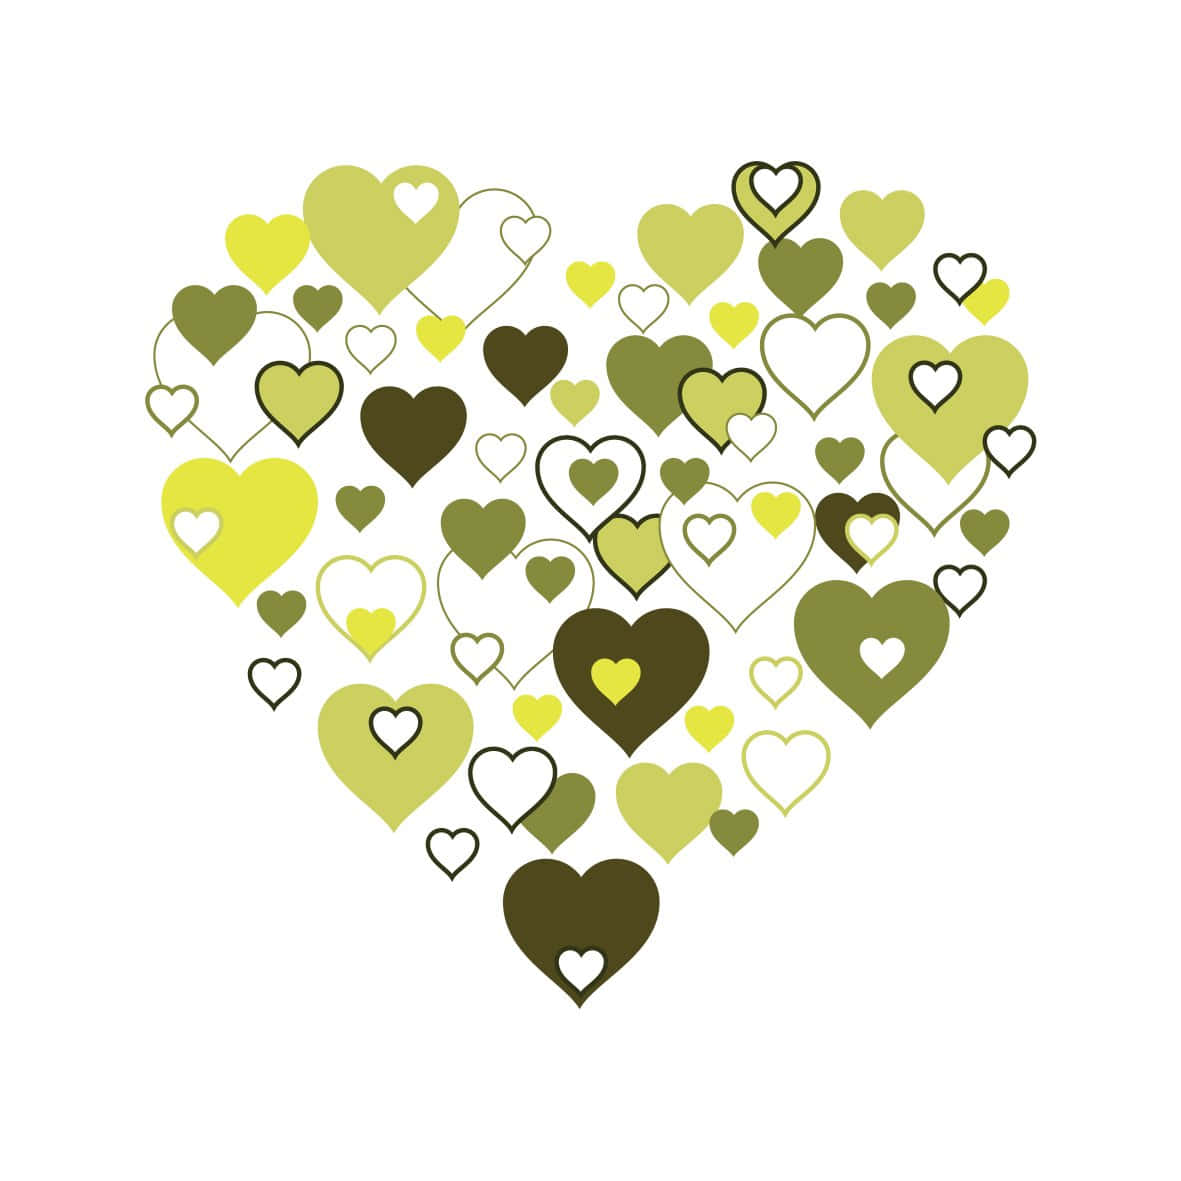 Captivating Green Heart Background